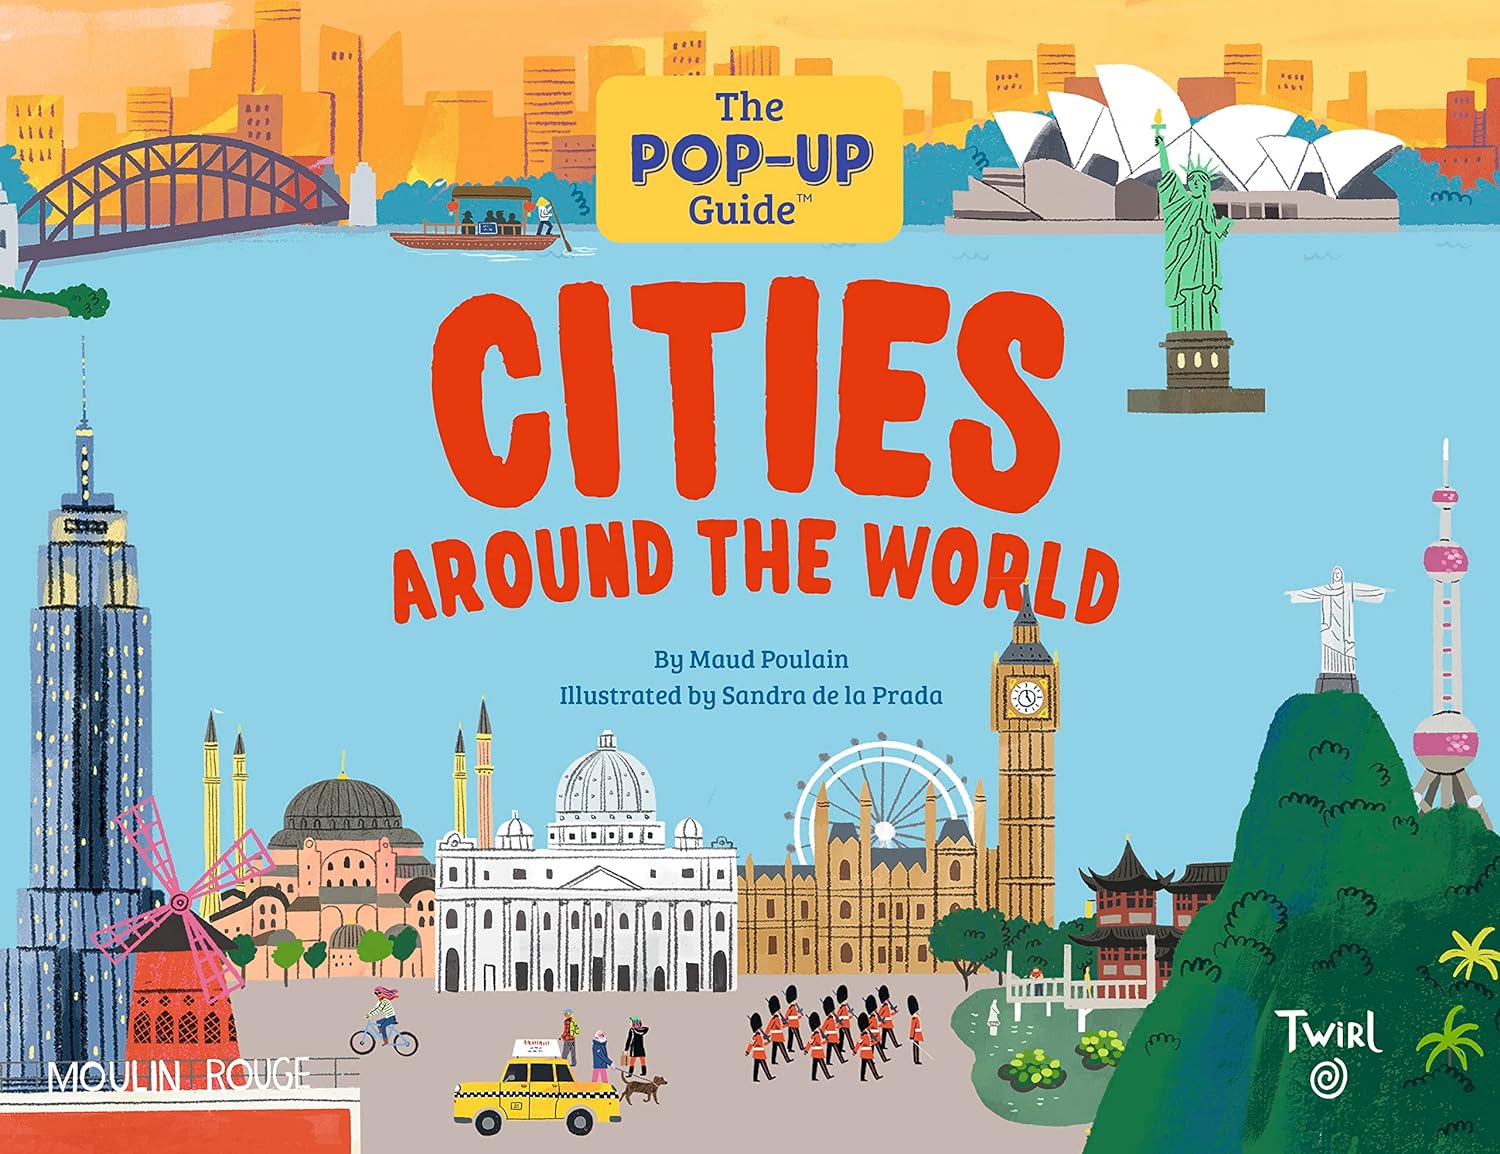 The Pop Up Guide: Cities Around The World